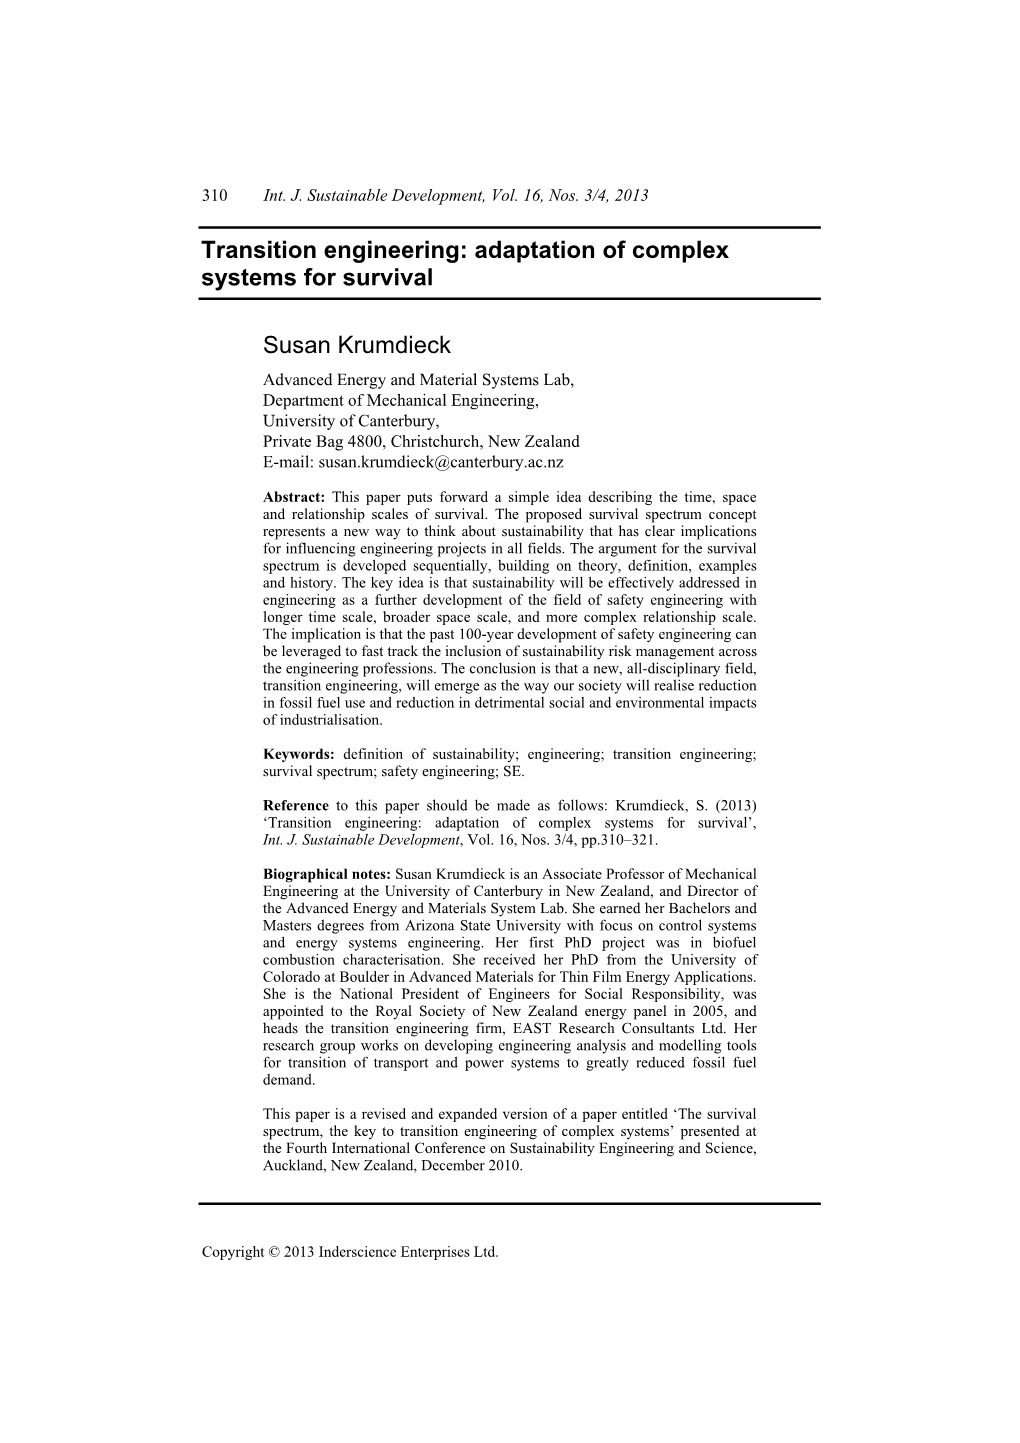 Transition Engineering: Adaptation of Complex Systems for Survival Susan